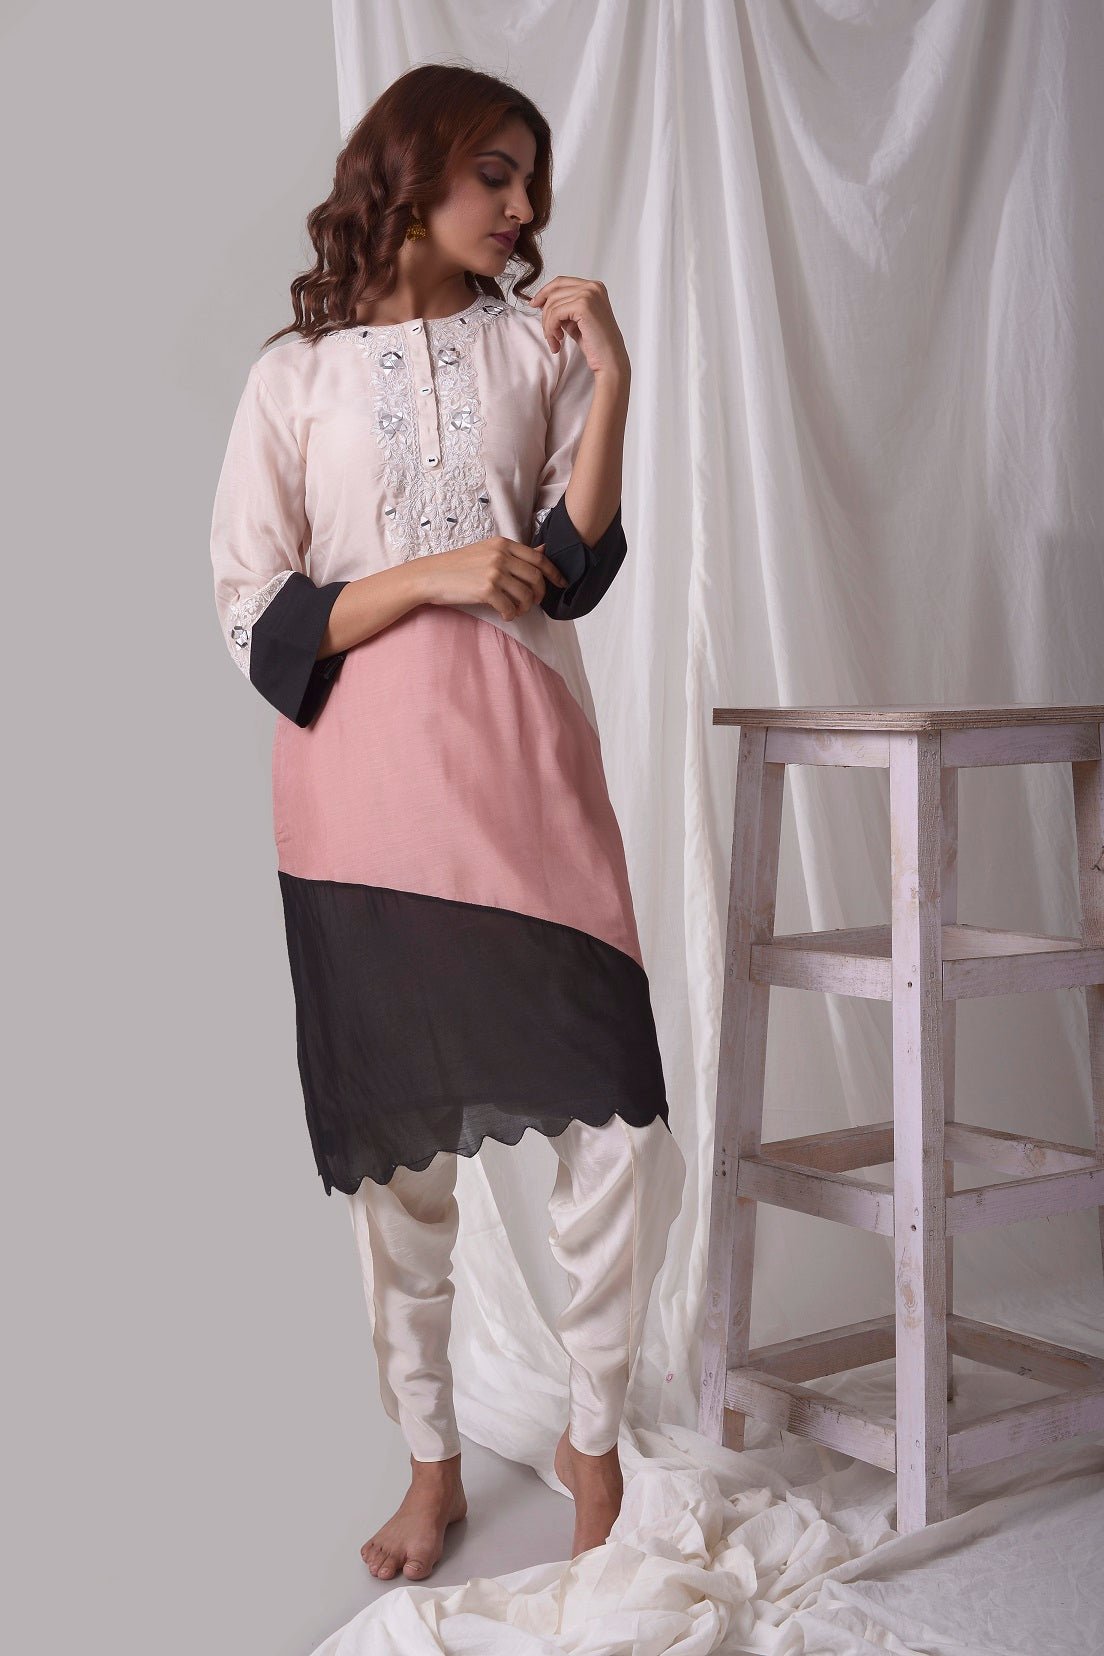 Buy off-white cotton silk suit online in USA. Suit has simple white work. Kurta has 3/4 length sleeves, white dhoti and its multi color with white, pink and black.Simple look makes it elegant. Be the talk of parties and weddings with exquisite designer gowns from Pure Elegance Indian clothing store in USA. Shop online now.-full view